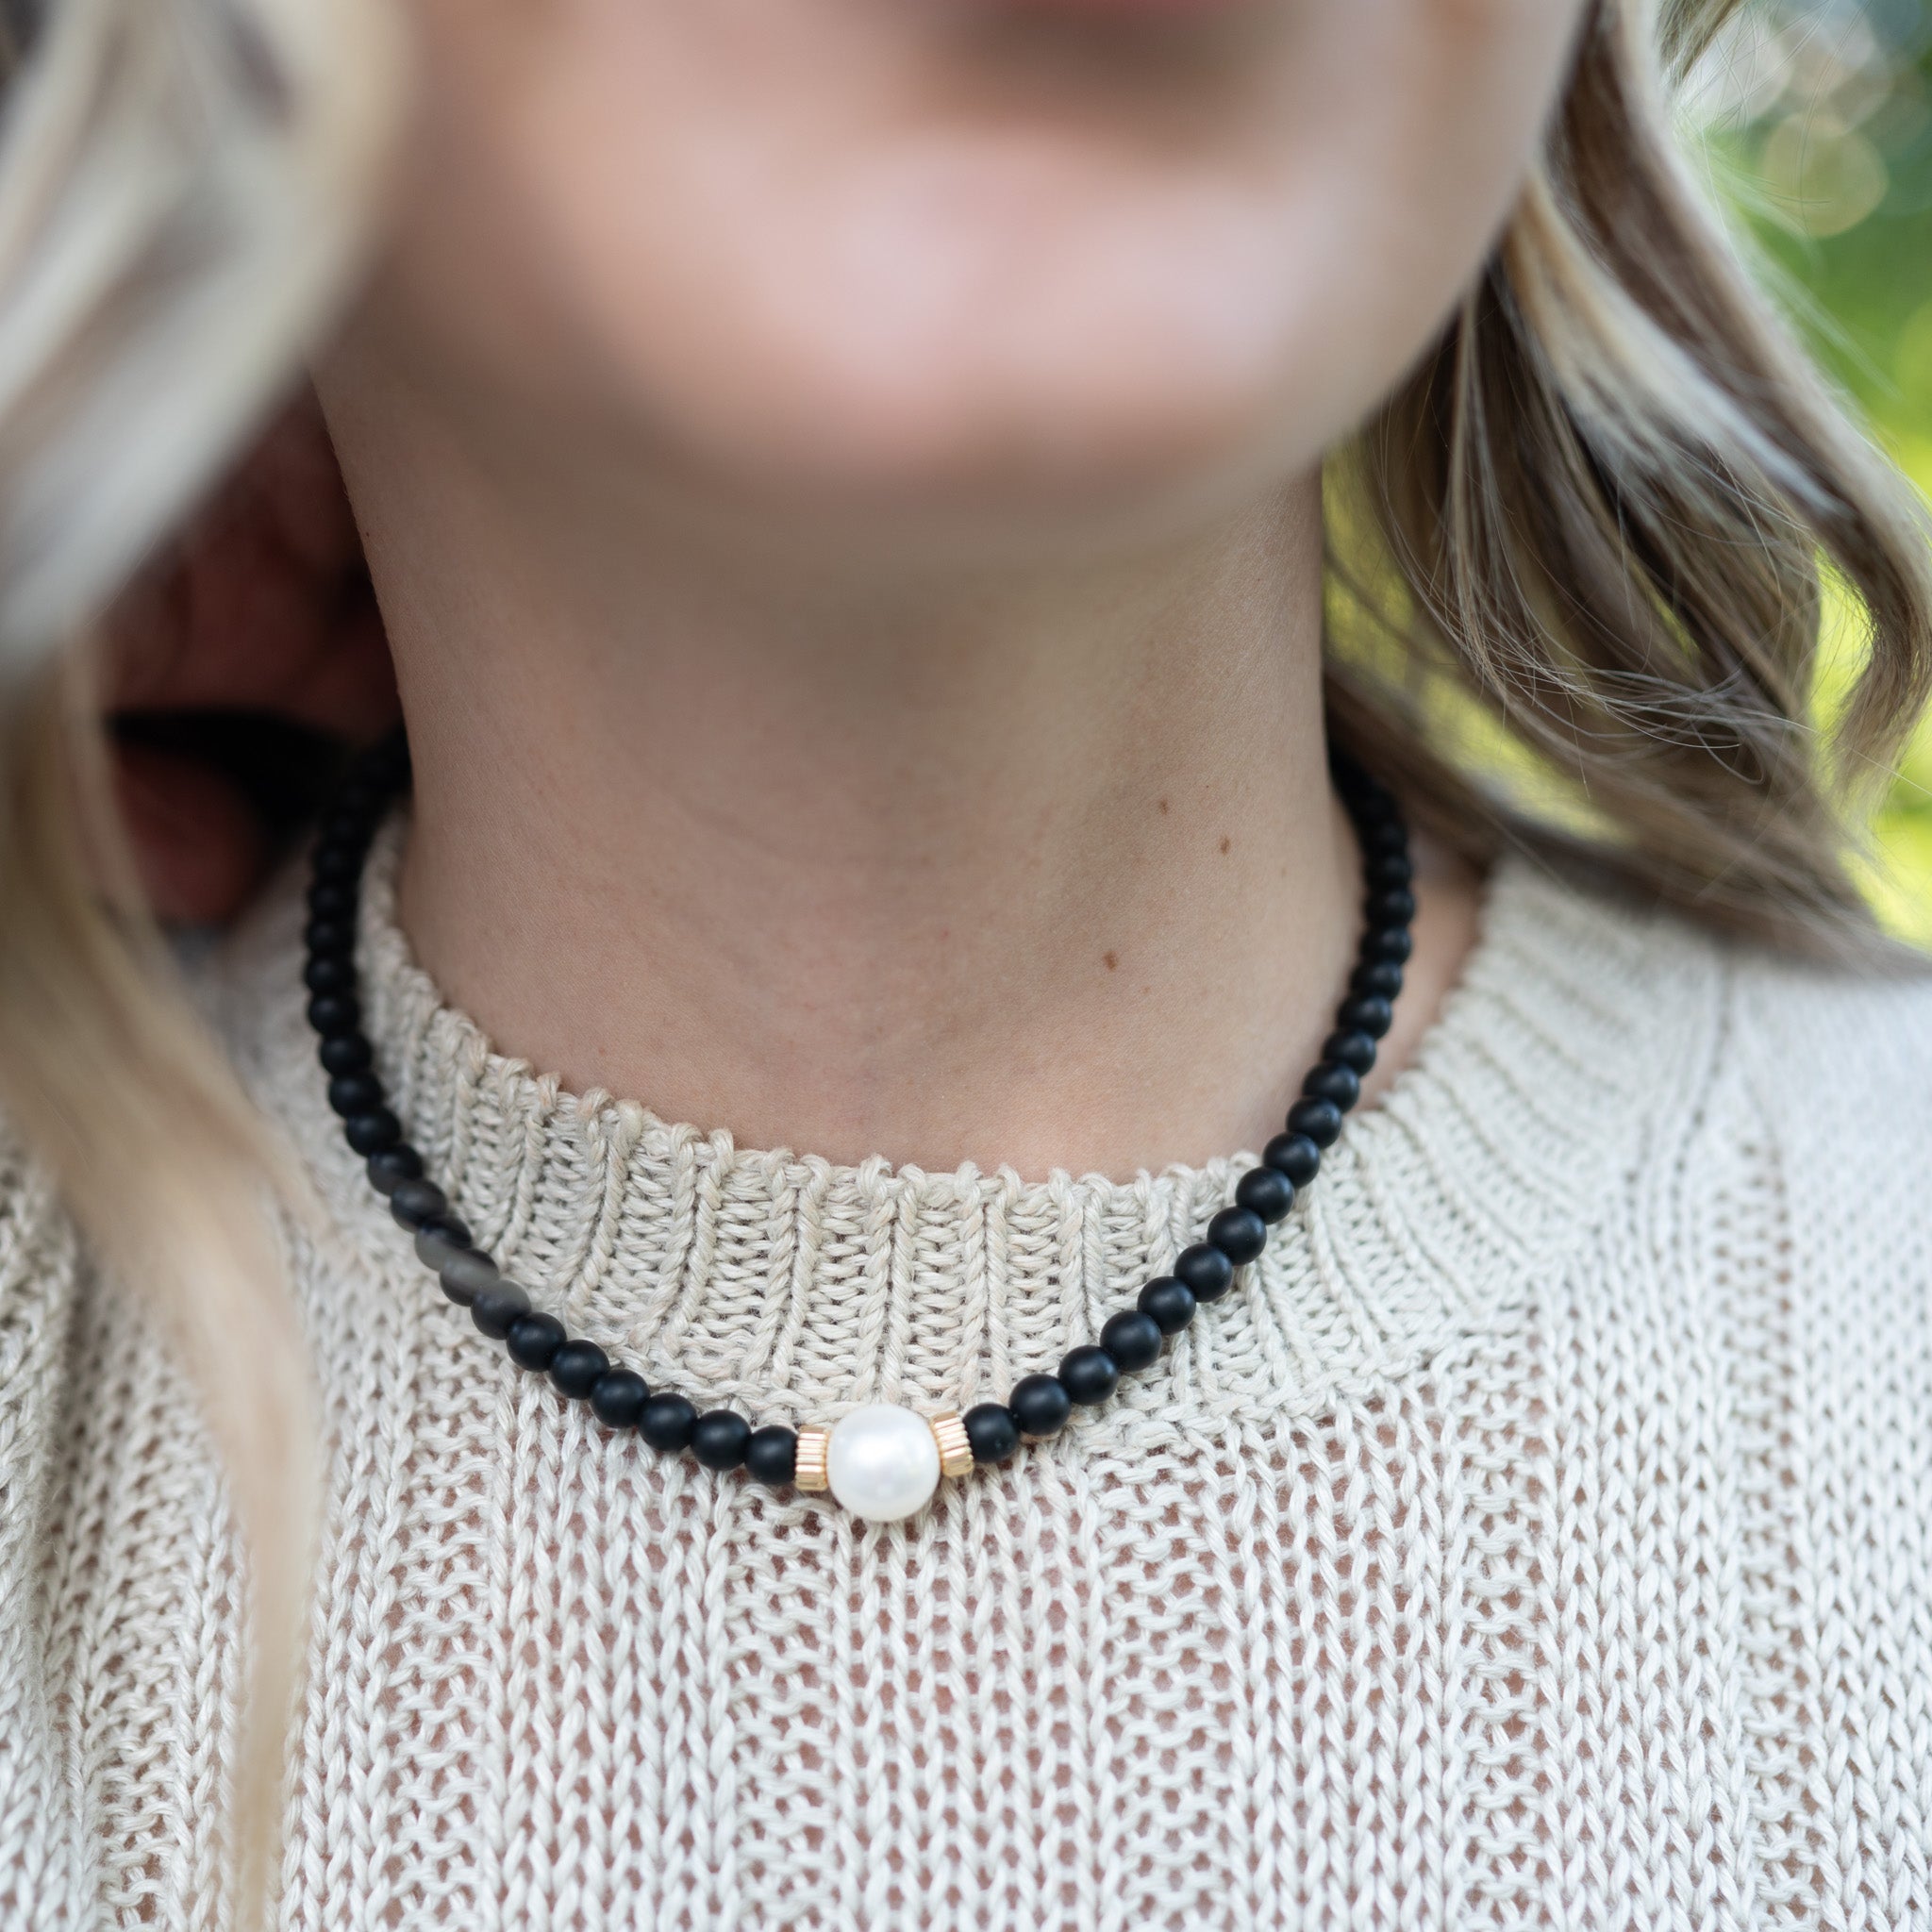 Matte Black & Freshwater Pearl Necklace